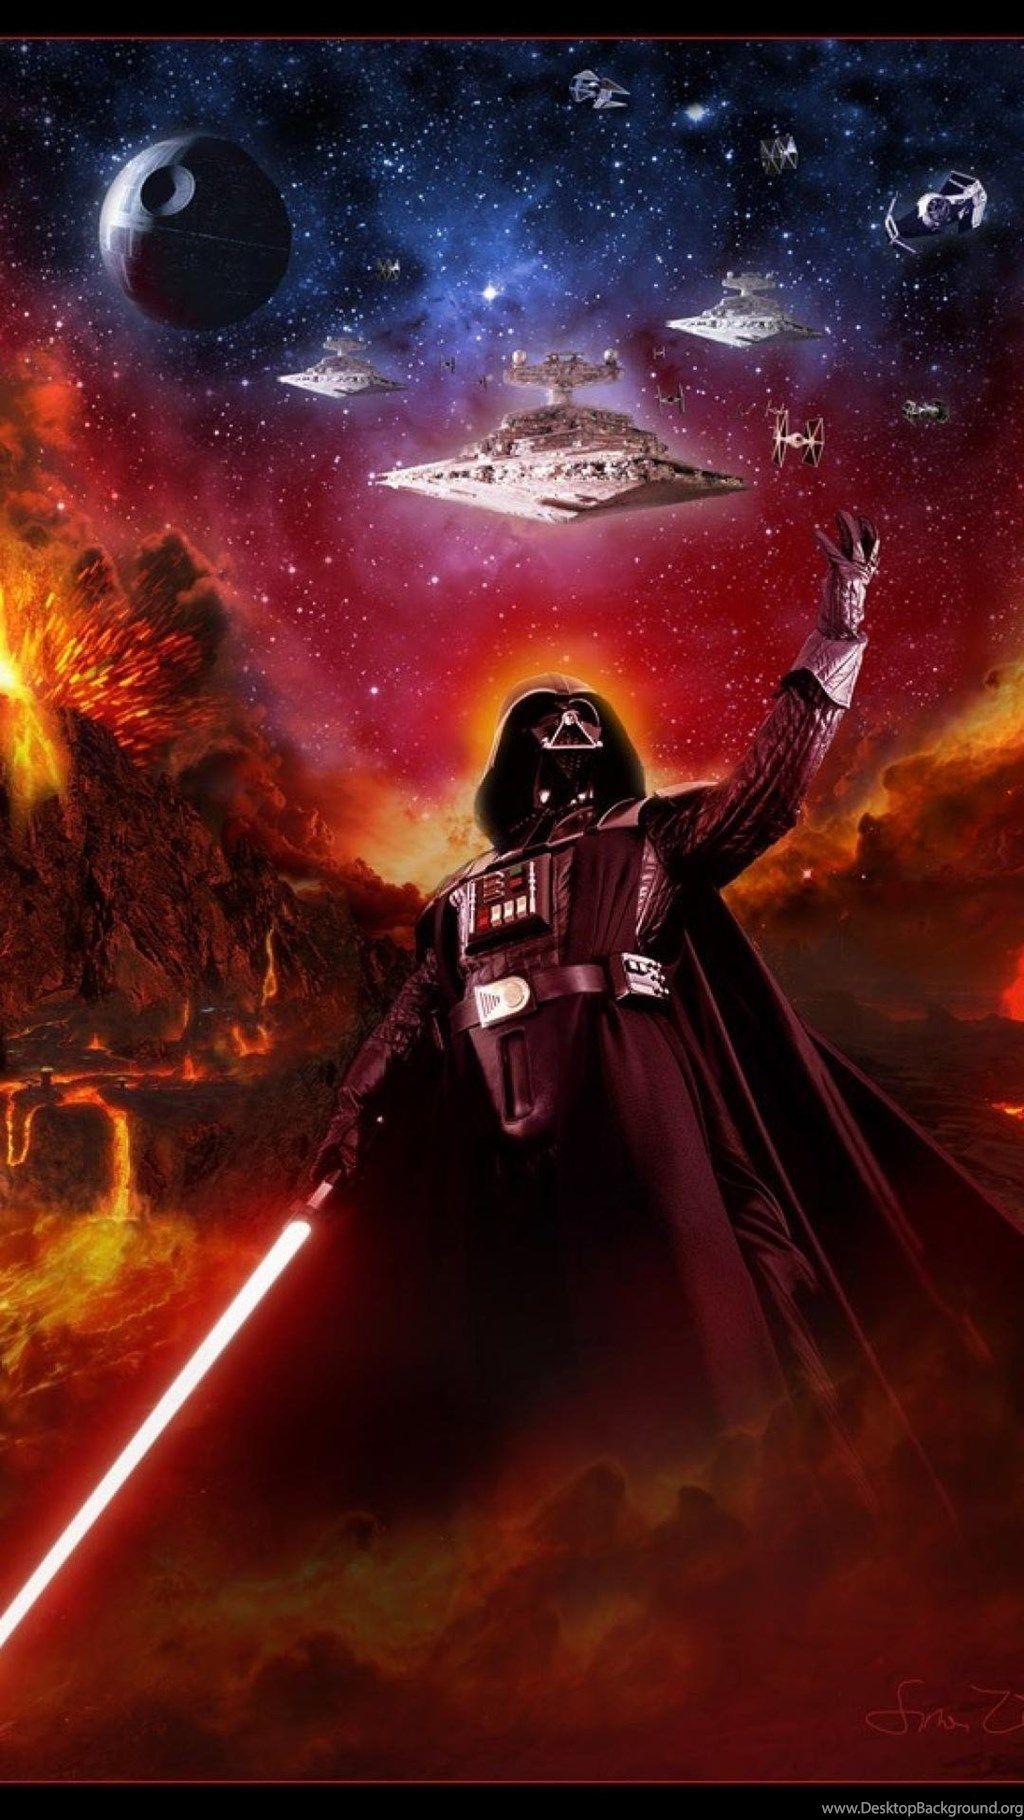 Animated Star Wars Wallpapers - Top